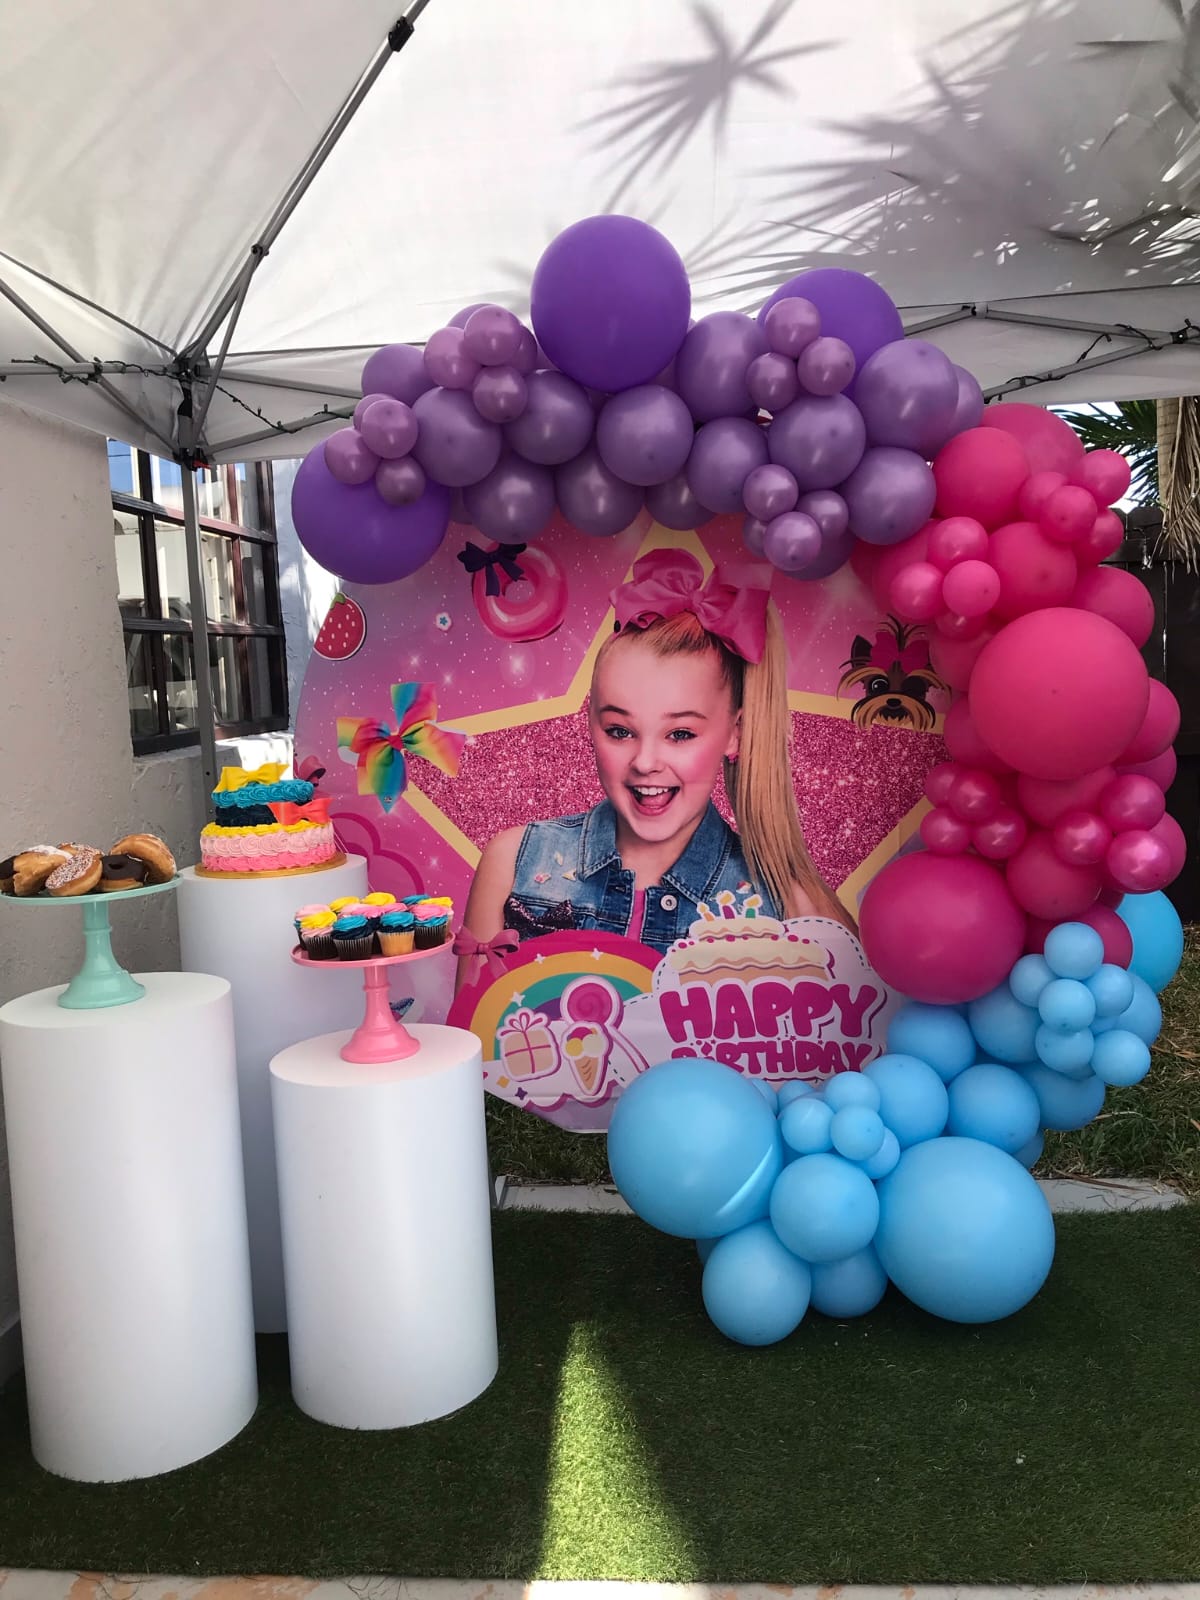 Backdrop, balloons and cylinders any theme